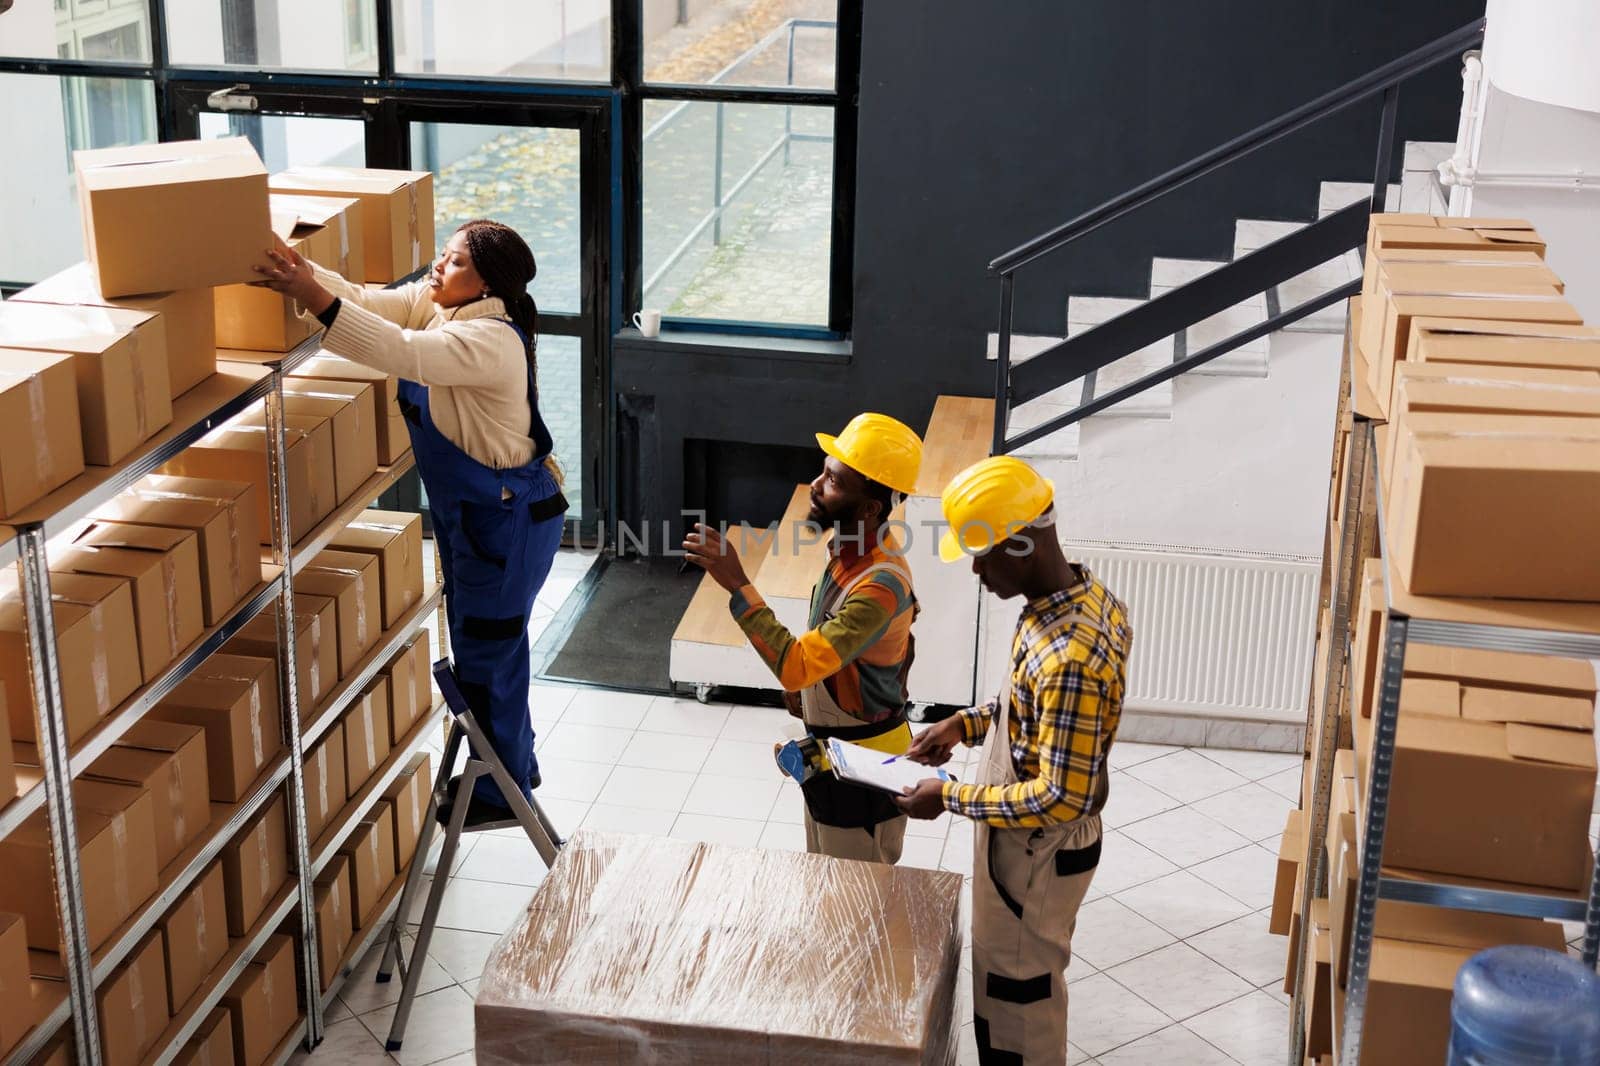 Post office employee standing on ladder and taking parcel by DCStudio